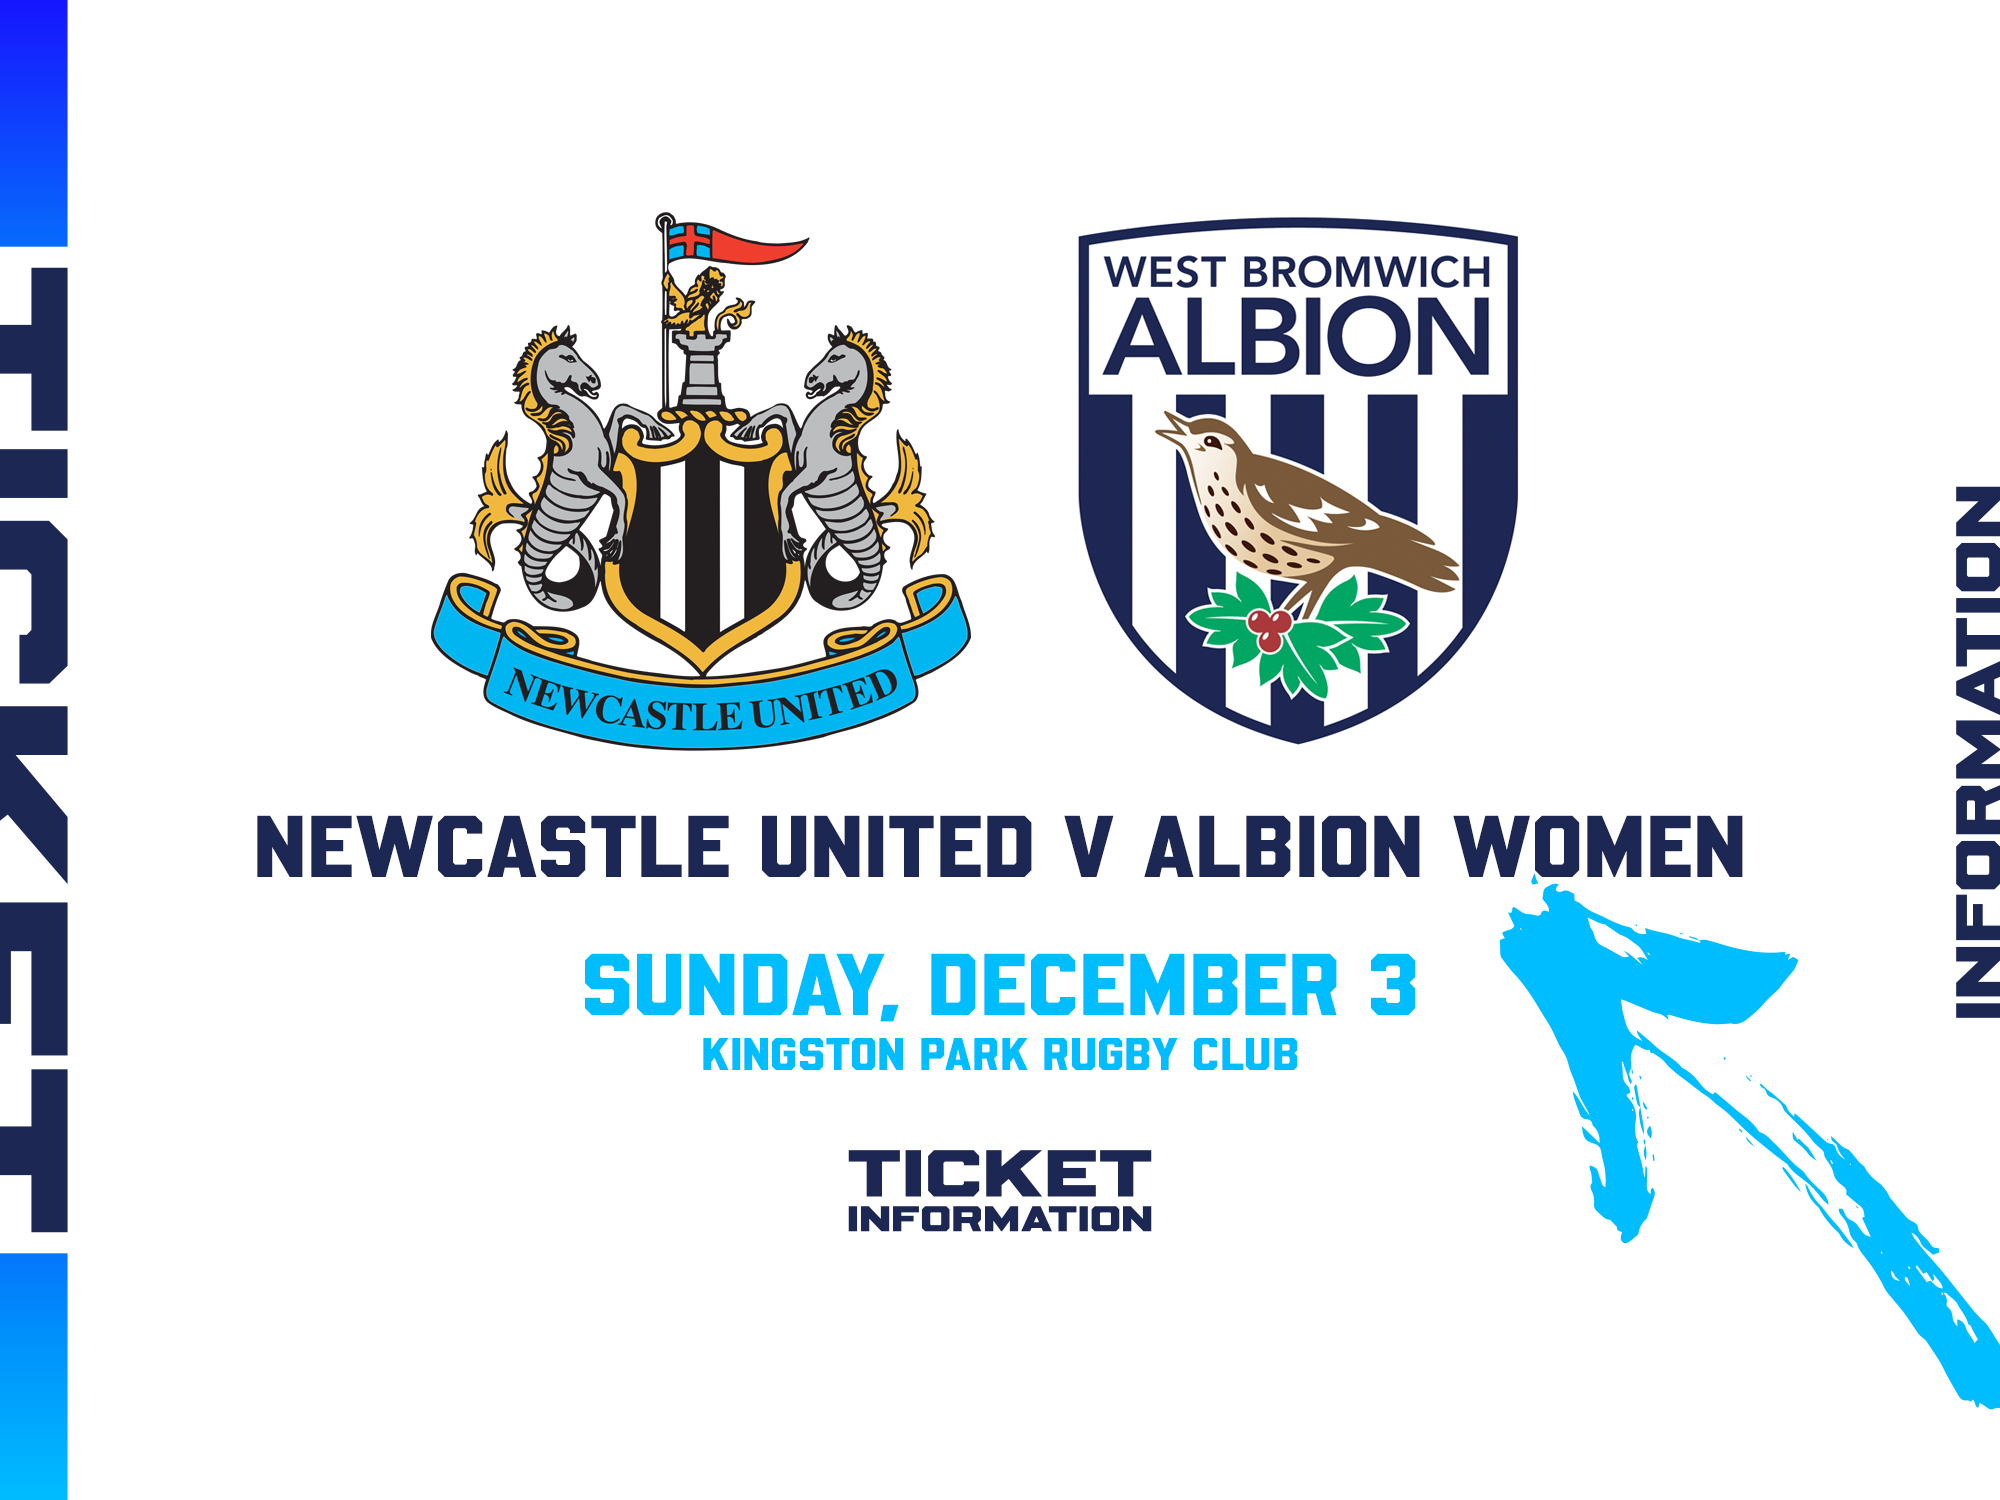 A ticket graphic displaying information for Albion Women's game at Newcastle